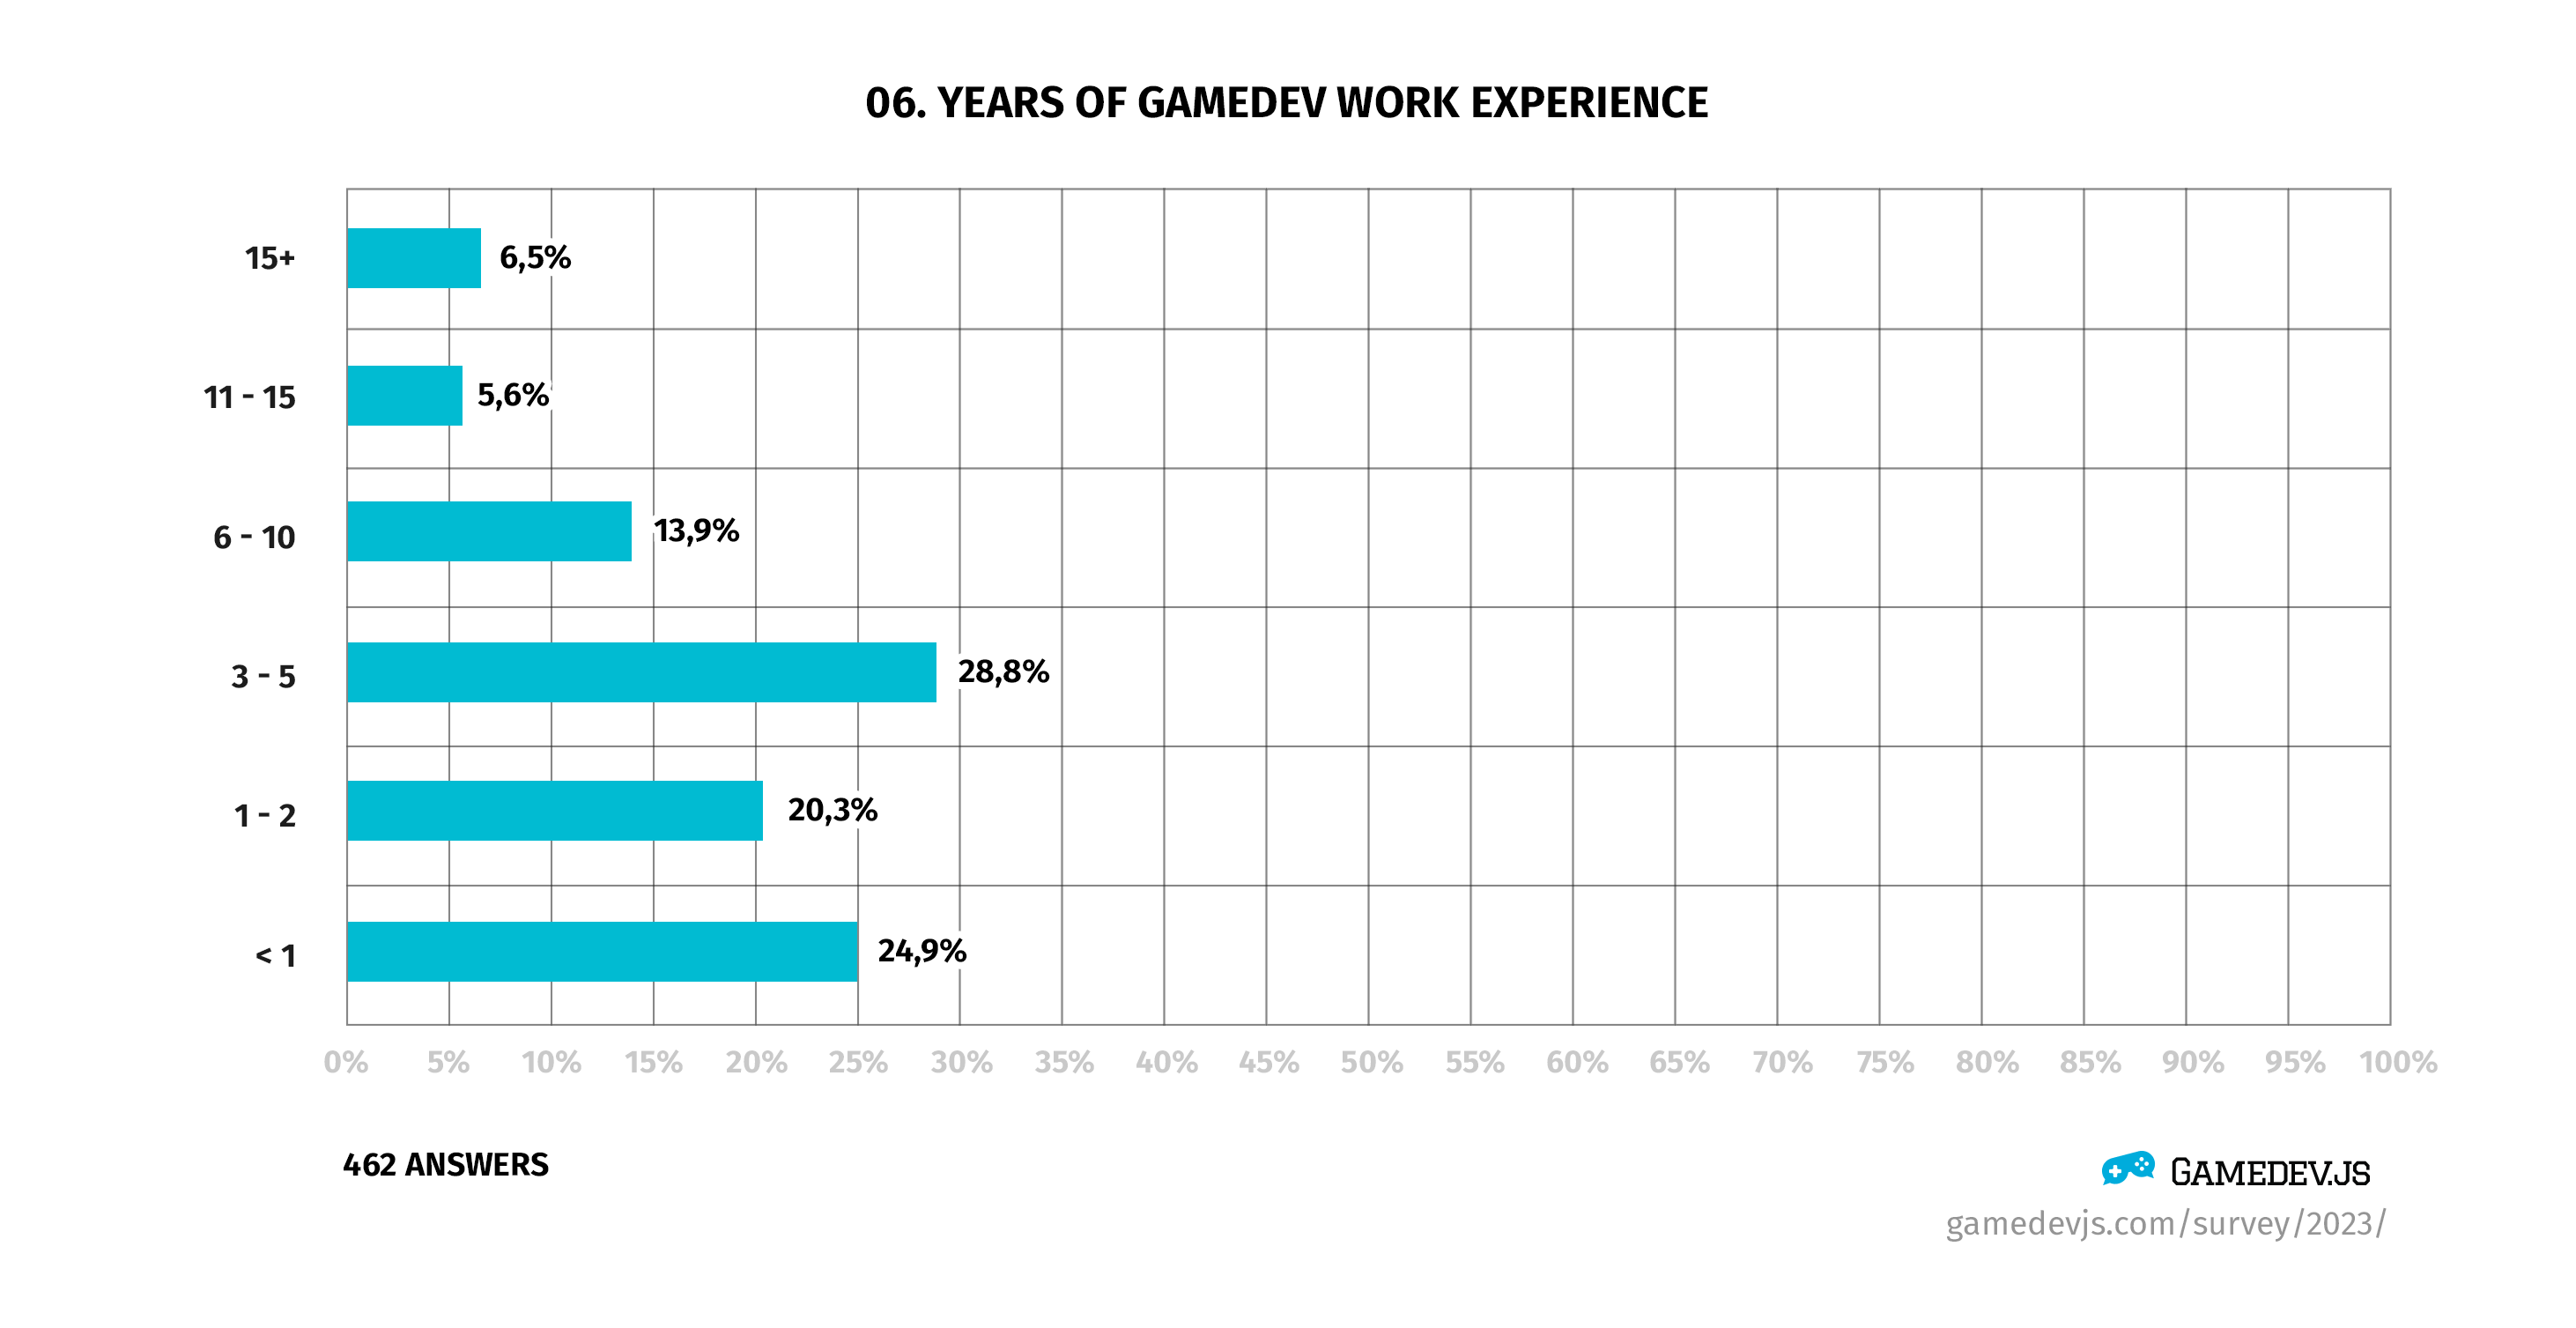 Gamedev.js Survey 2023 - Question #06: Years of gamedev work experience